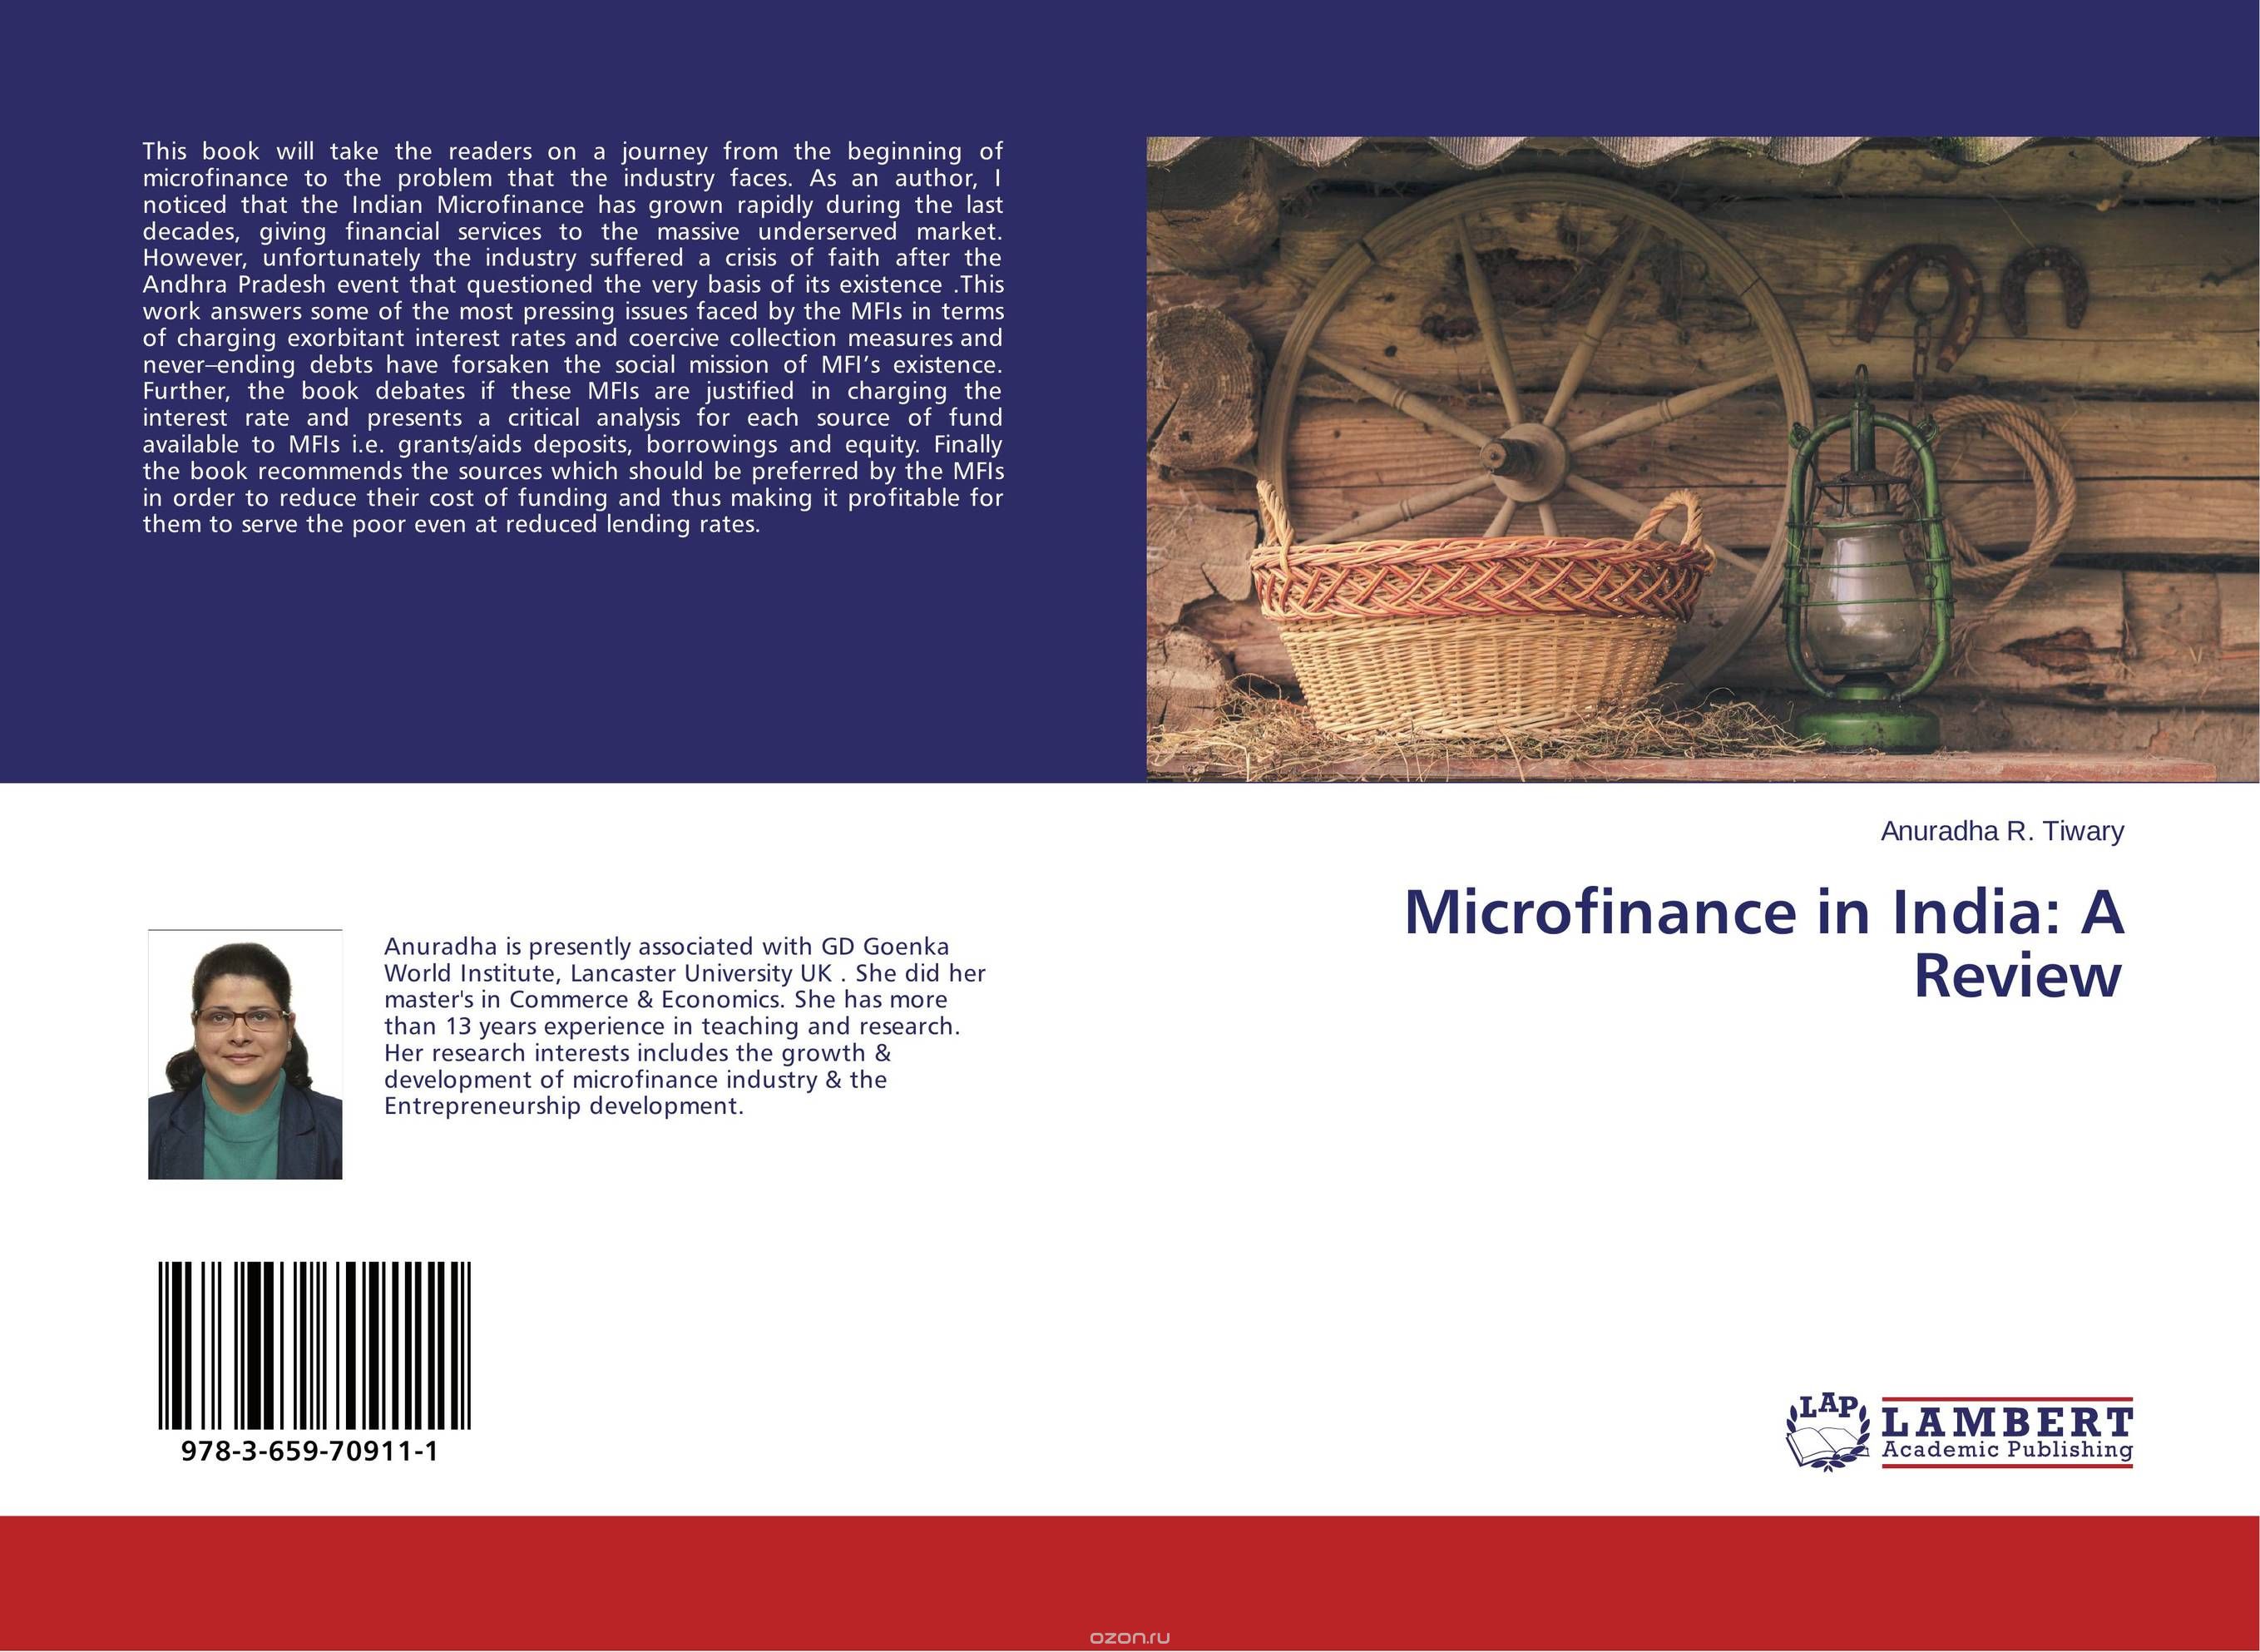 Microfinance in India: A Review